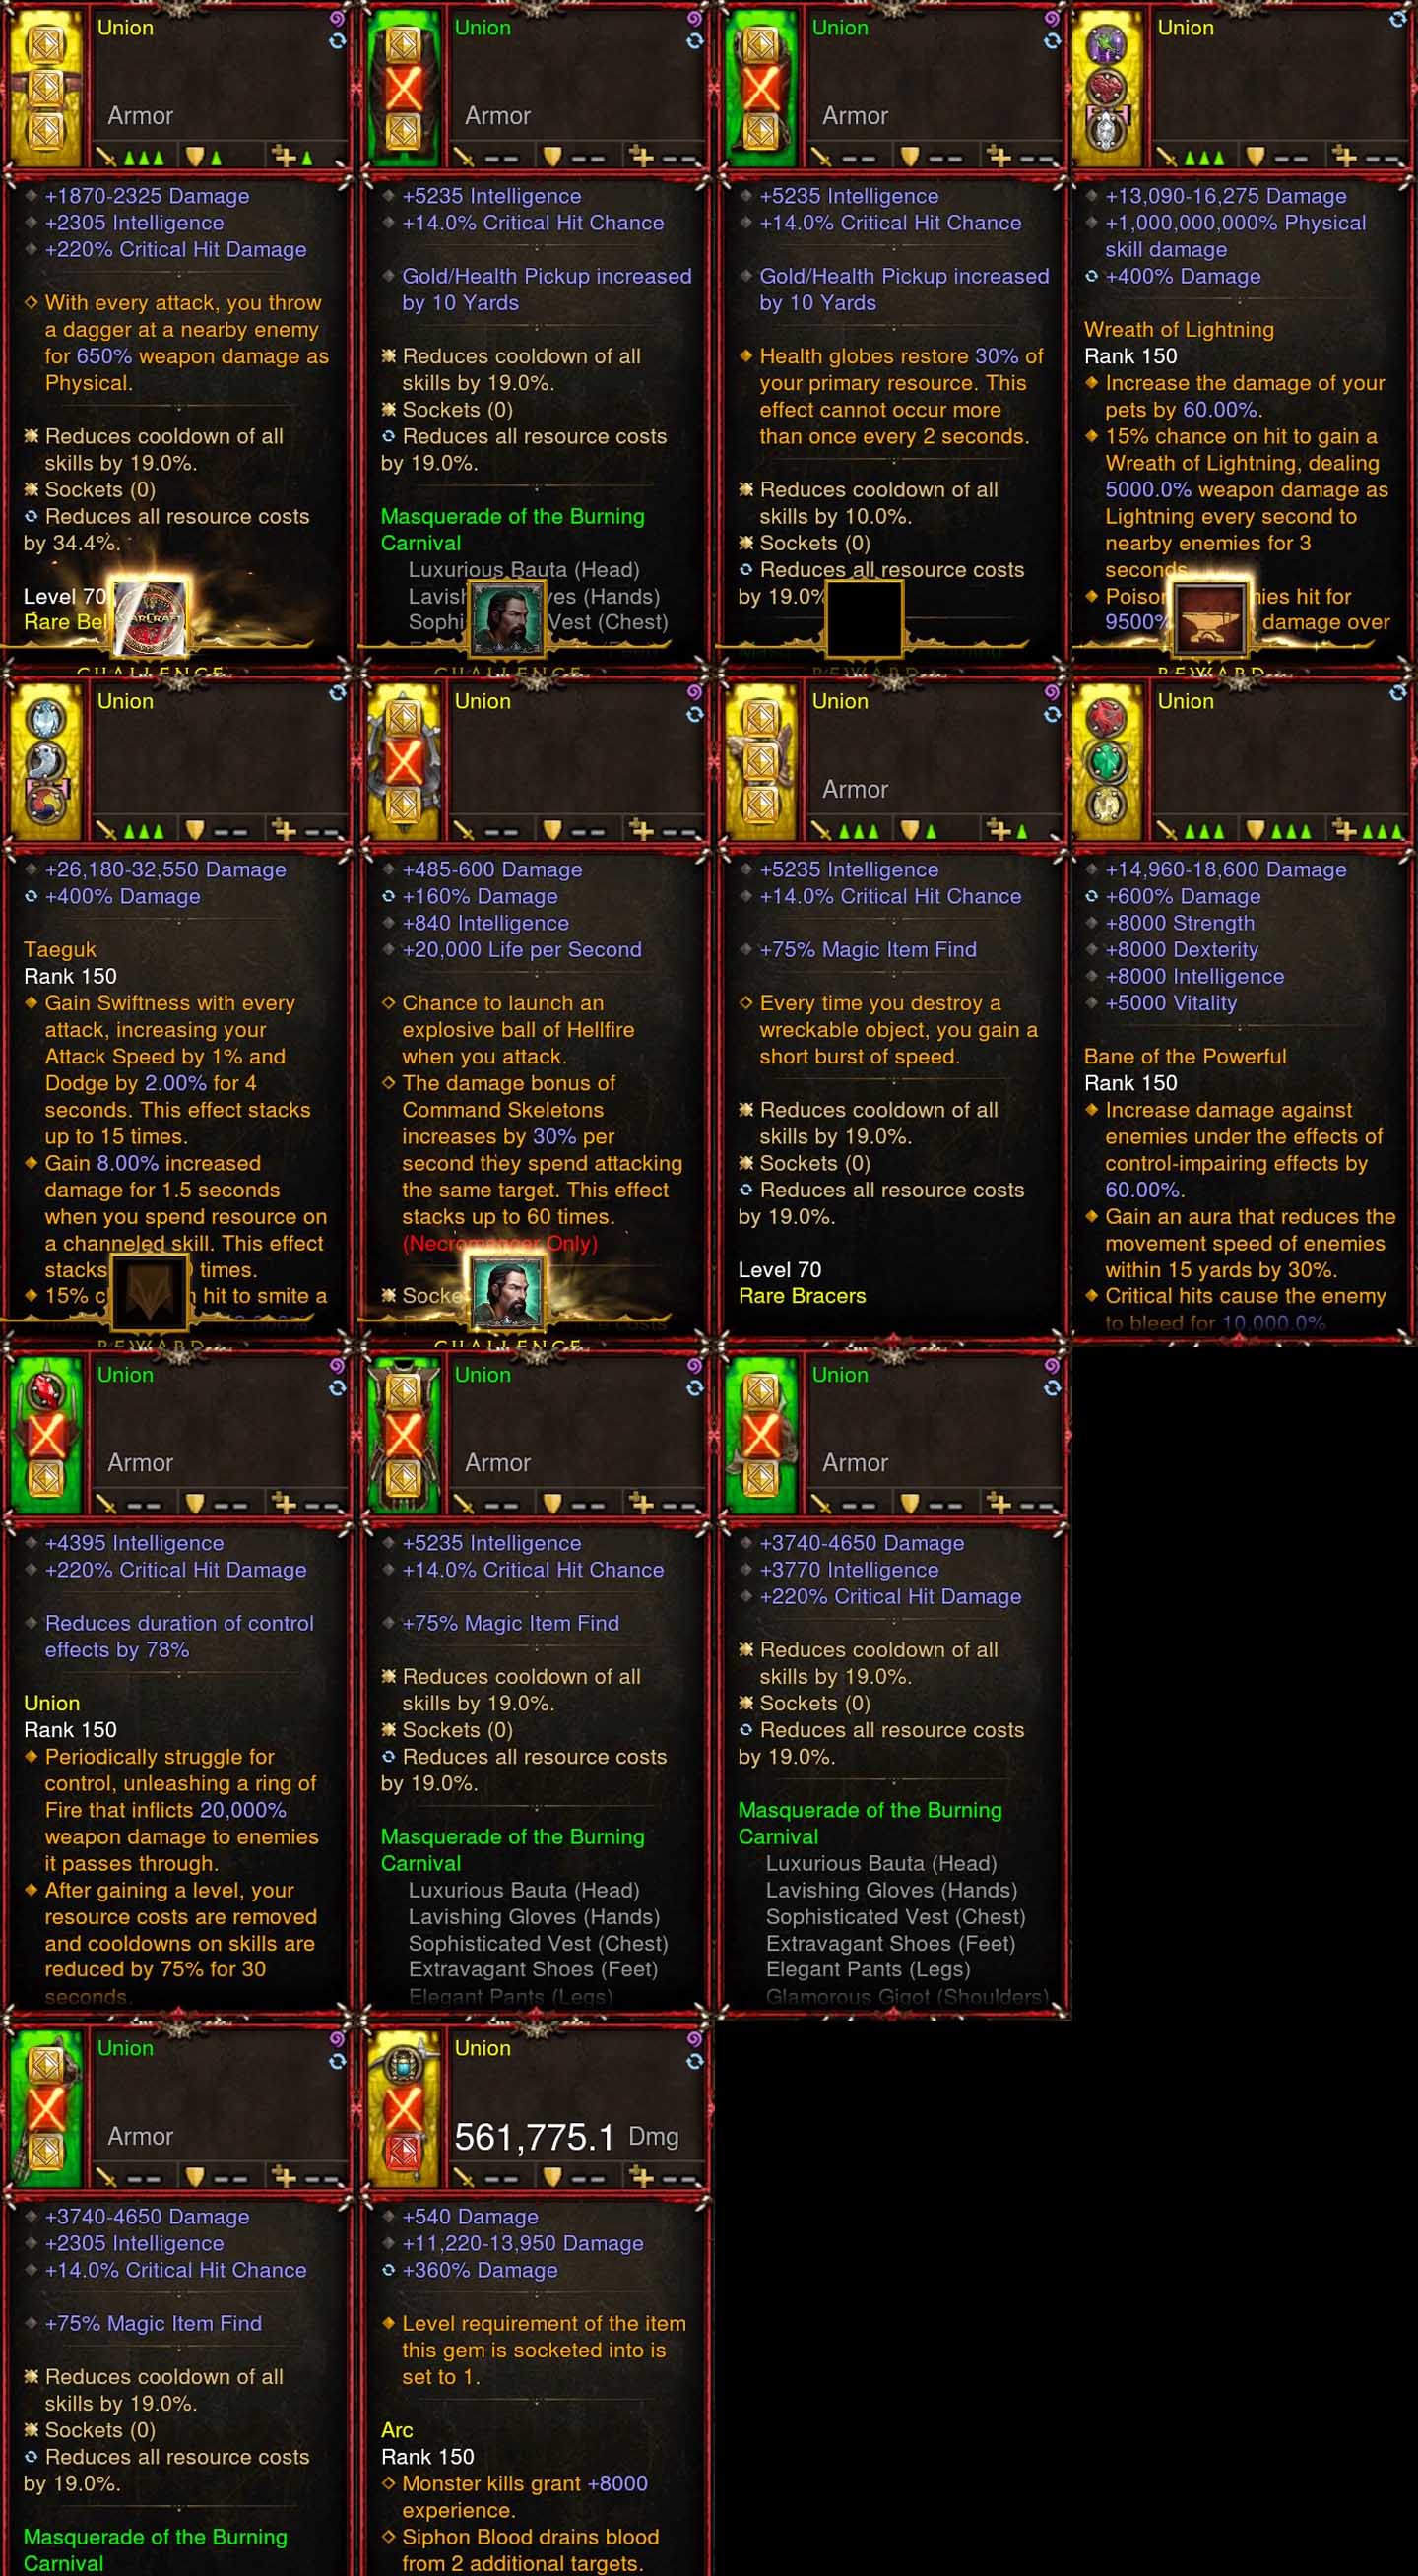 Seasonal [Primal Ancient] [QUAD DPS] 2.6.9 Immortality v5 Masquerade Necromancer Set Union Diablo 3 Mods ROS Seasonal and Non Seasonal Save Mod - Modded Items and Gear - Hacks - Cheats - Trainers for Playstation 4 - Playstation 5 - Nintendo Switch - Xbox One